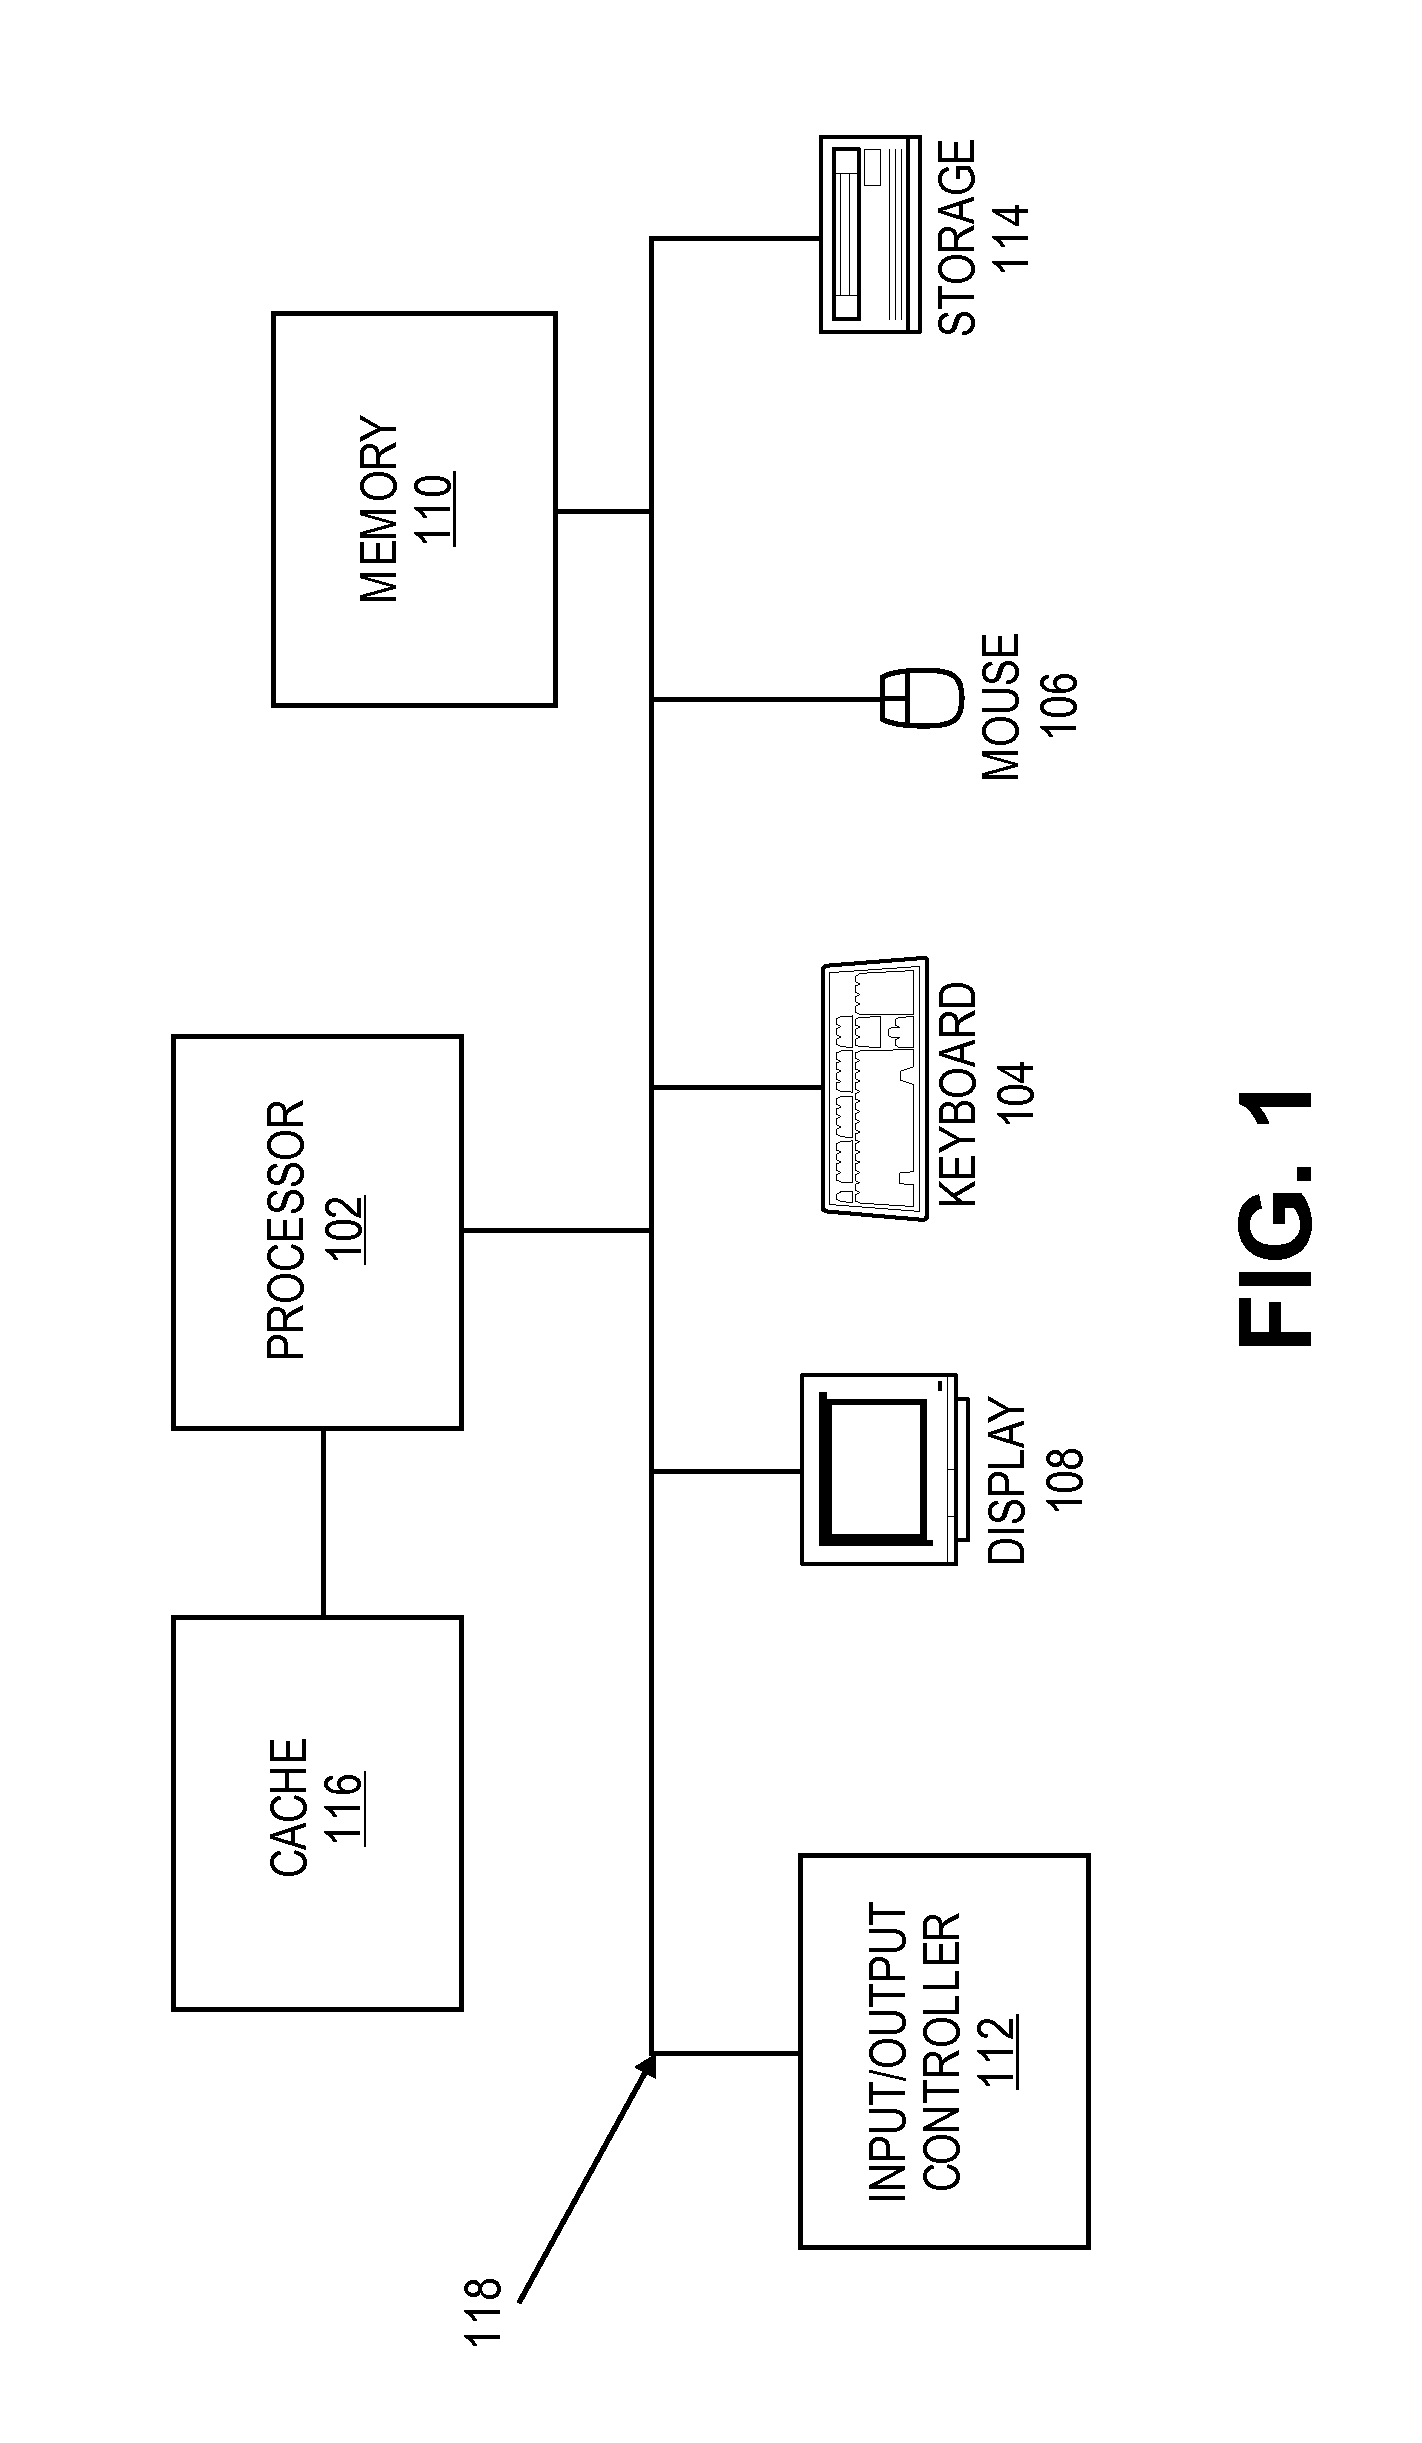 Methods and systems for testing tool with comparative testing